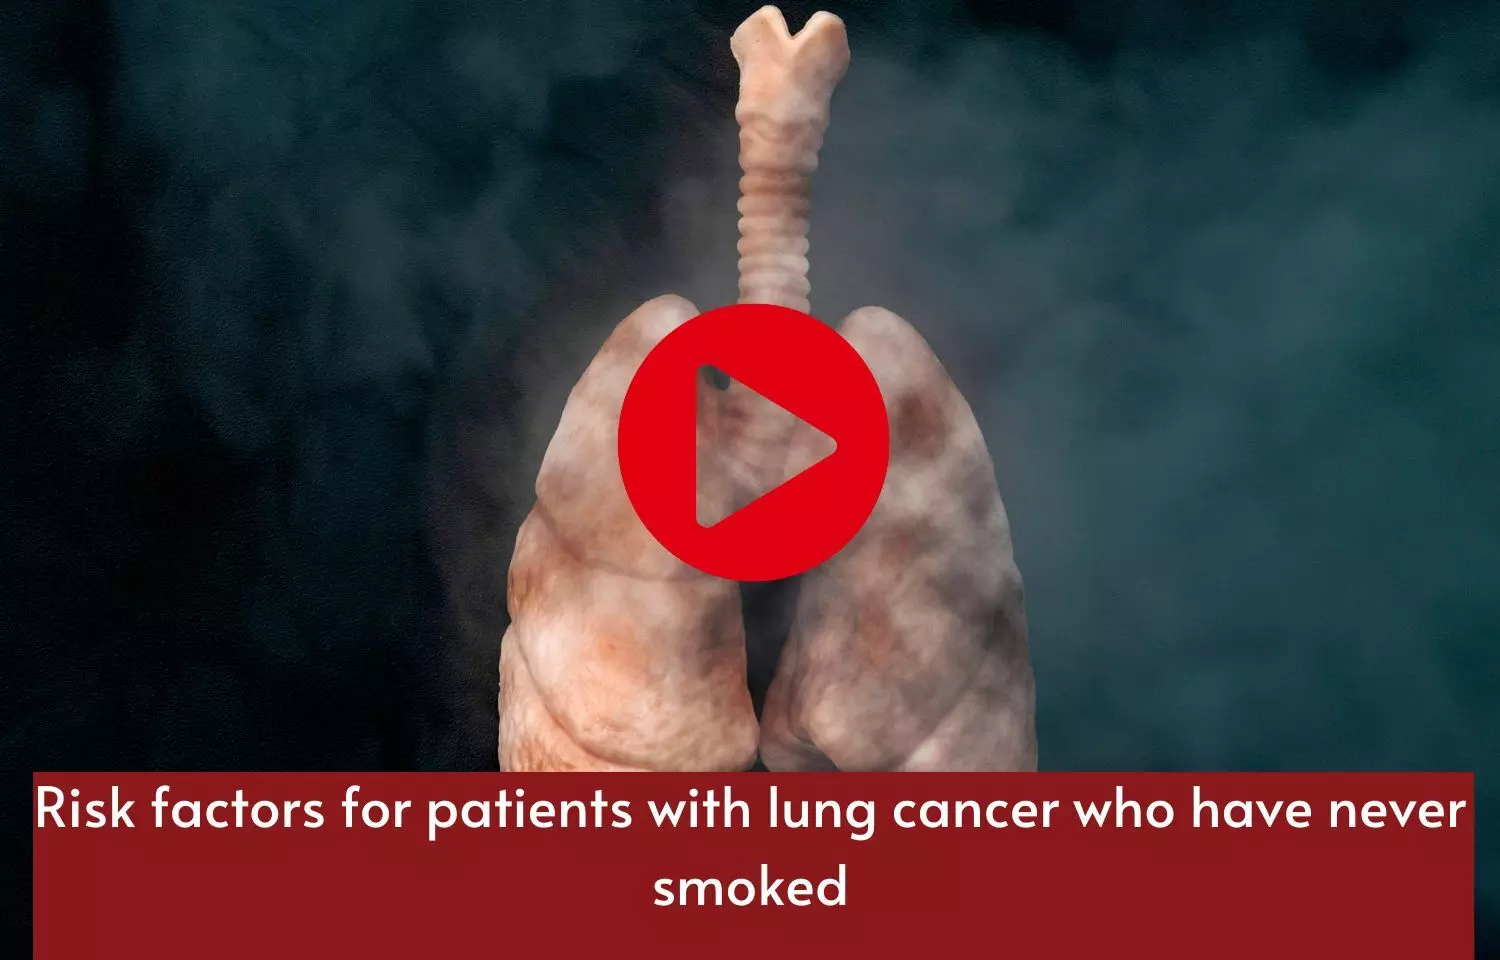 Risk factors for patients with lung cancer who have never smoked